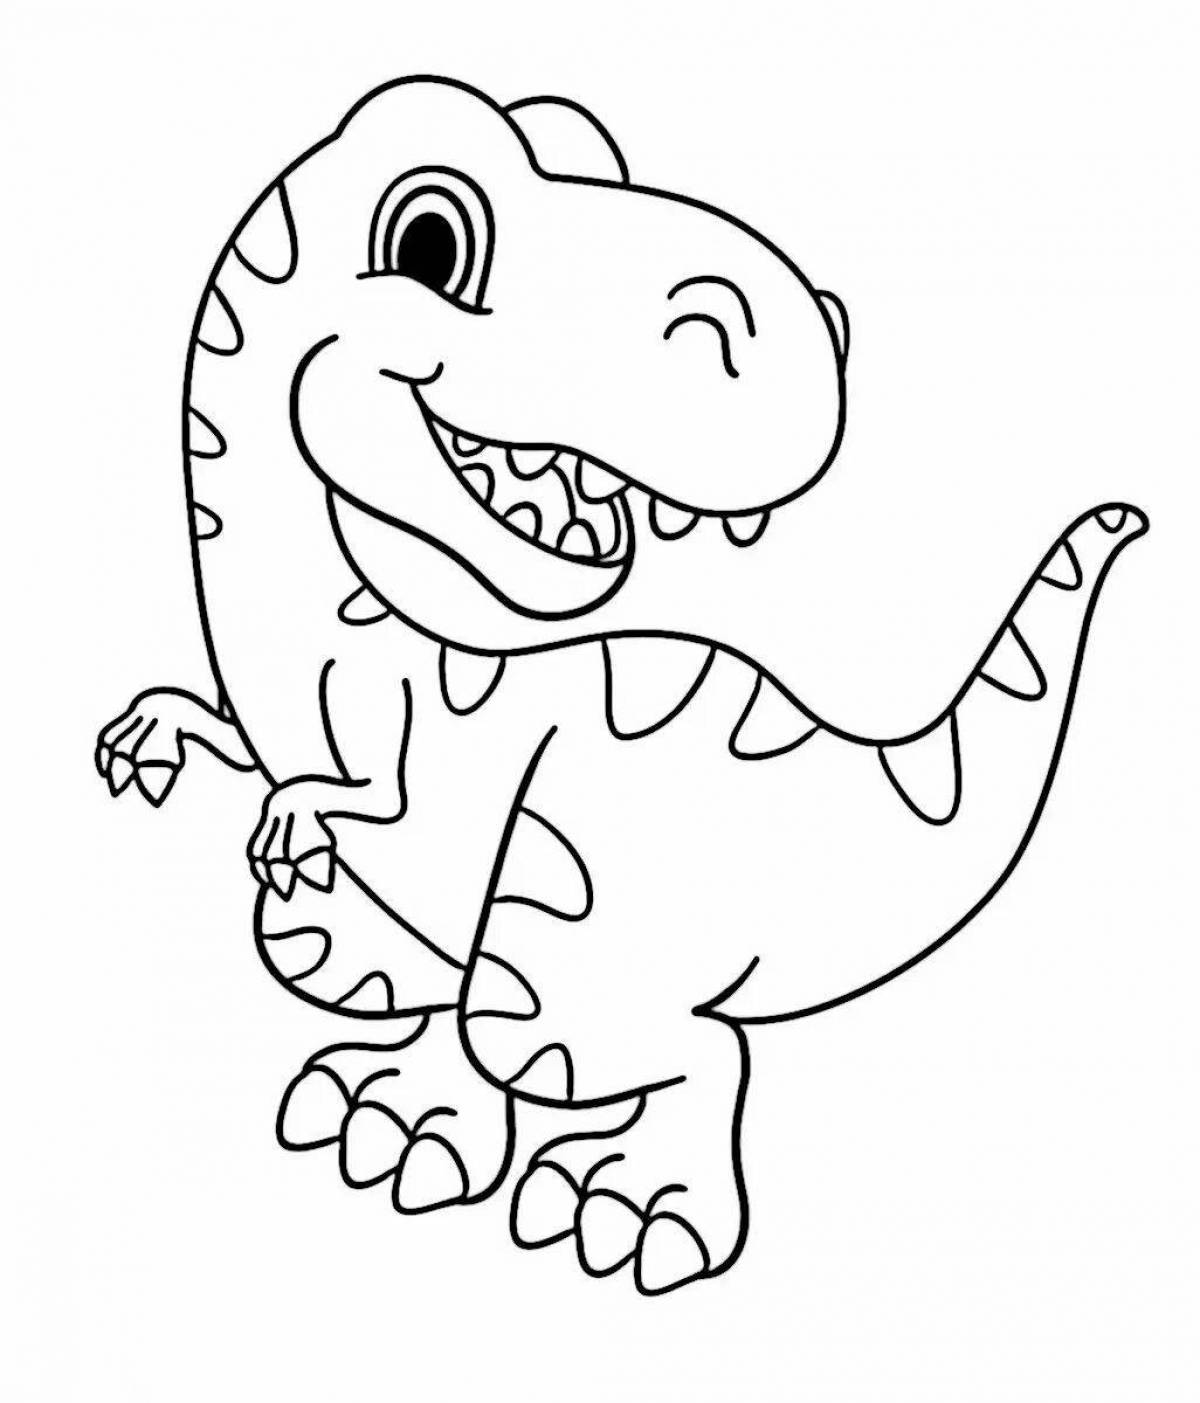 Tirex adorable coloring book for kids